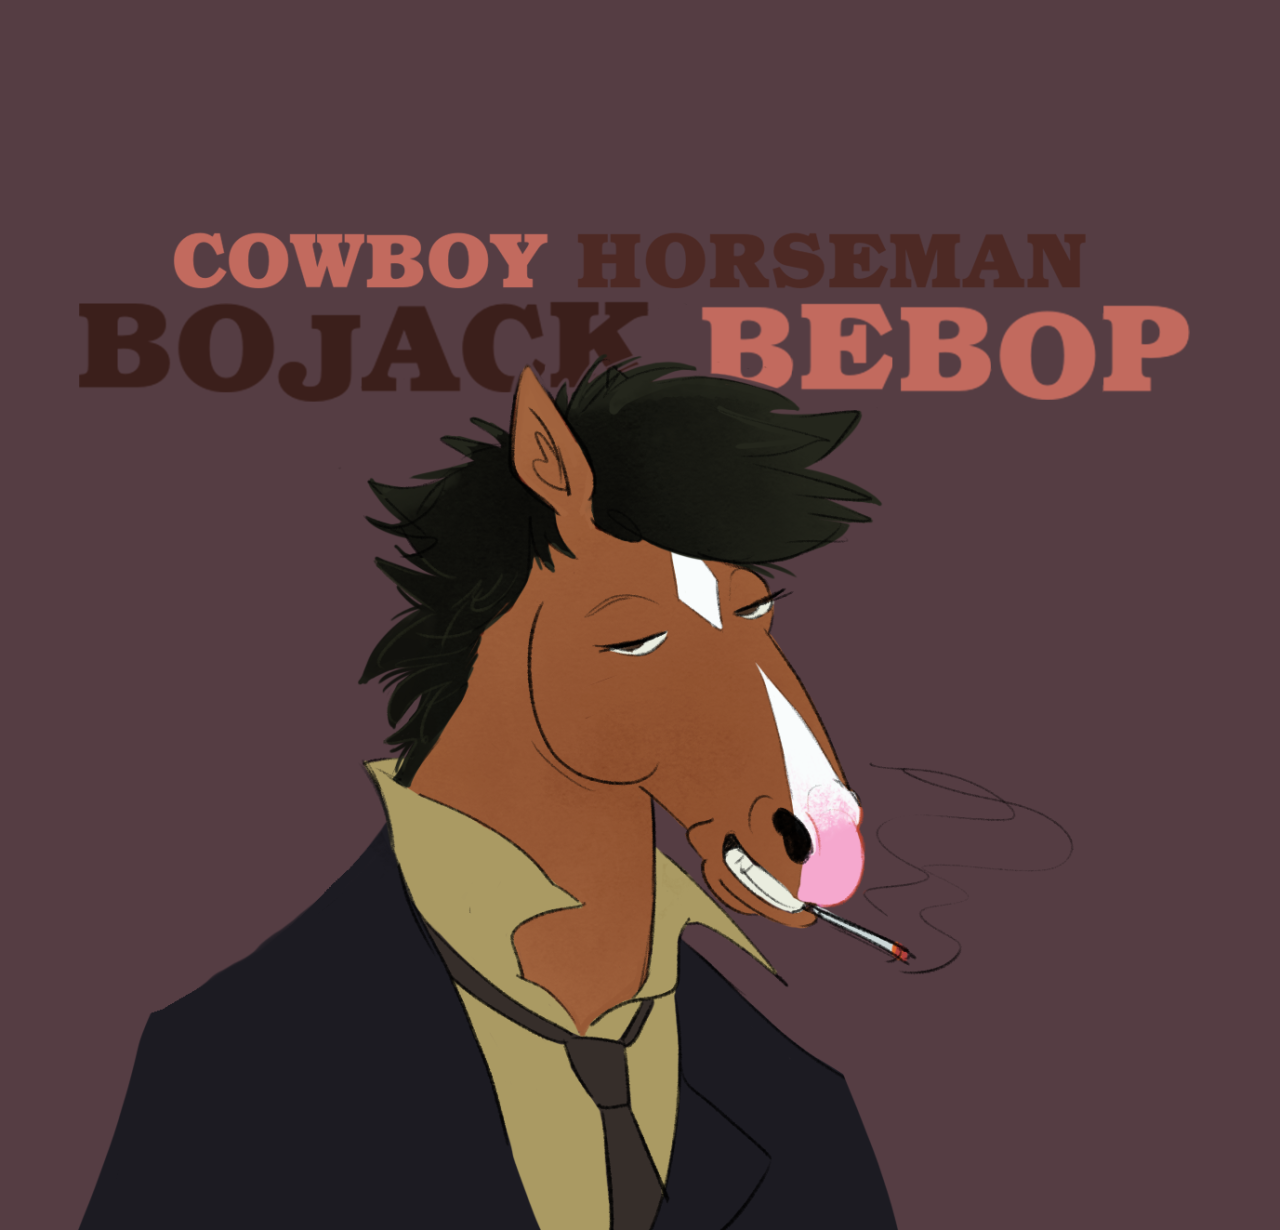 W Me Pal Told Me Today She Thought Bojack Horseman